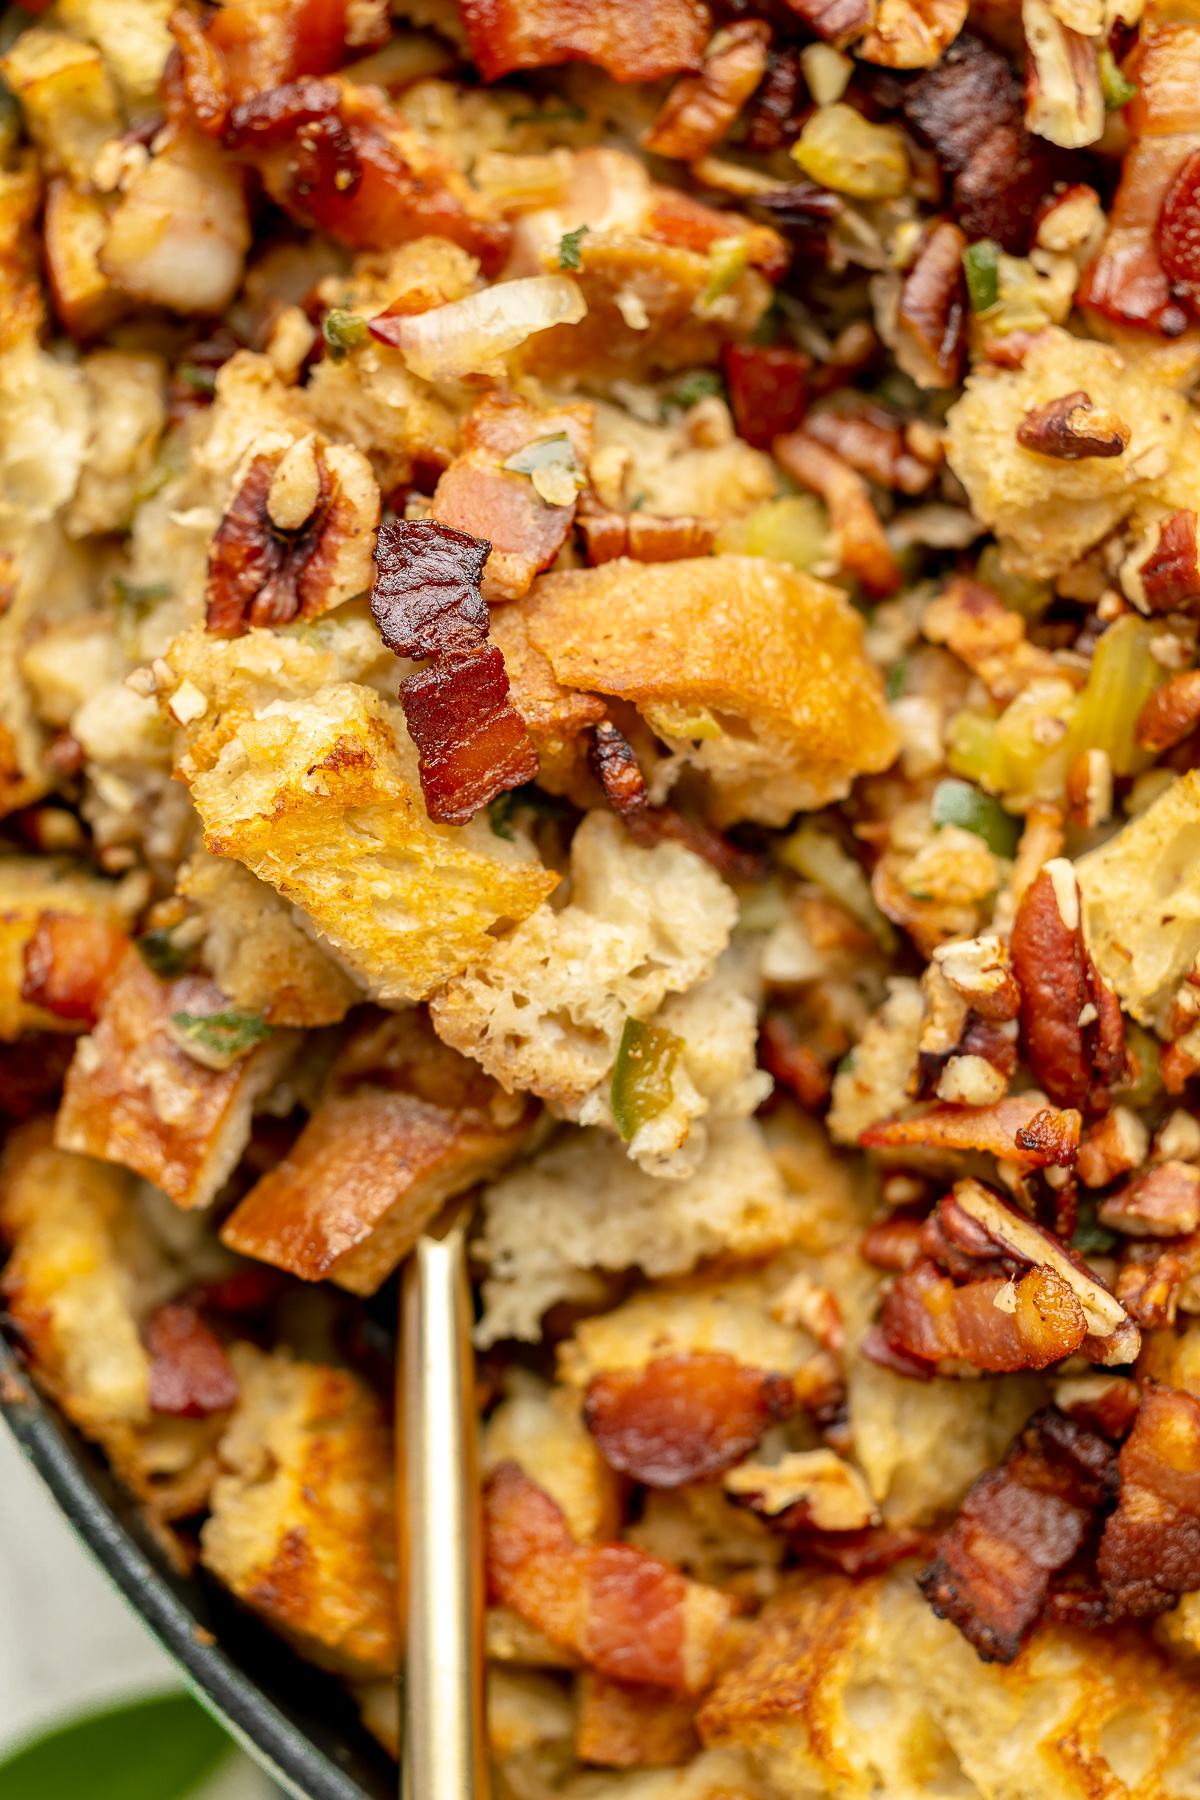 Large serving spoon scooping up sourdough stuffing, dressed with bacon and pecans.